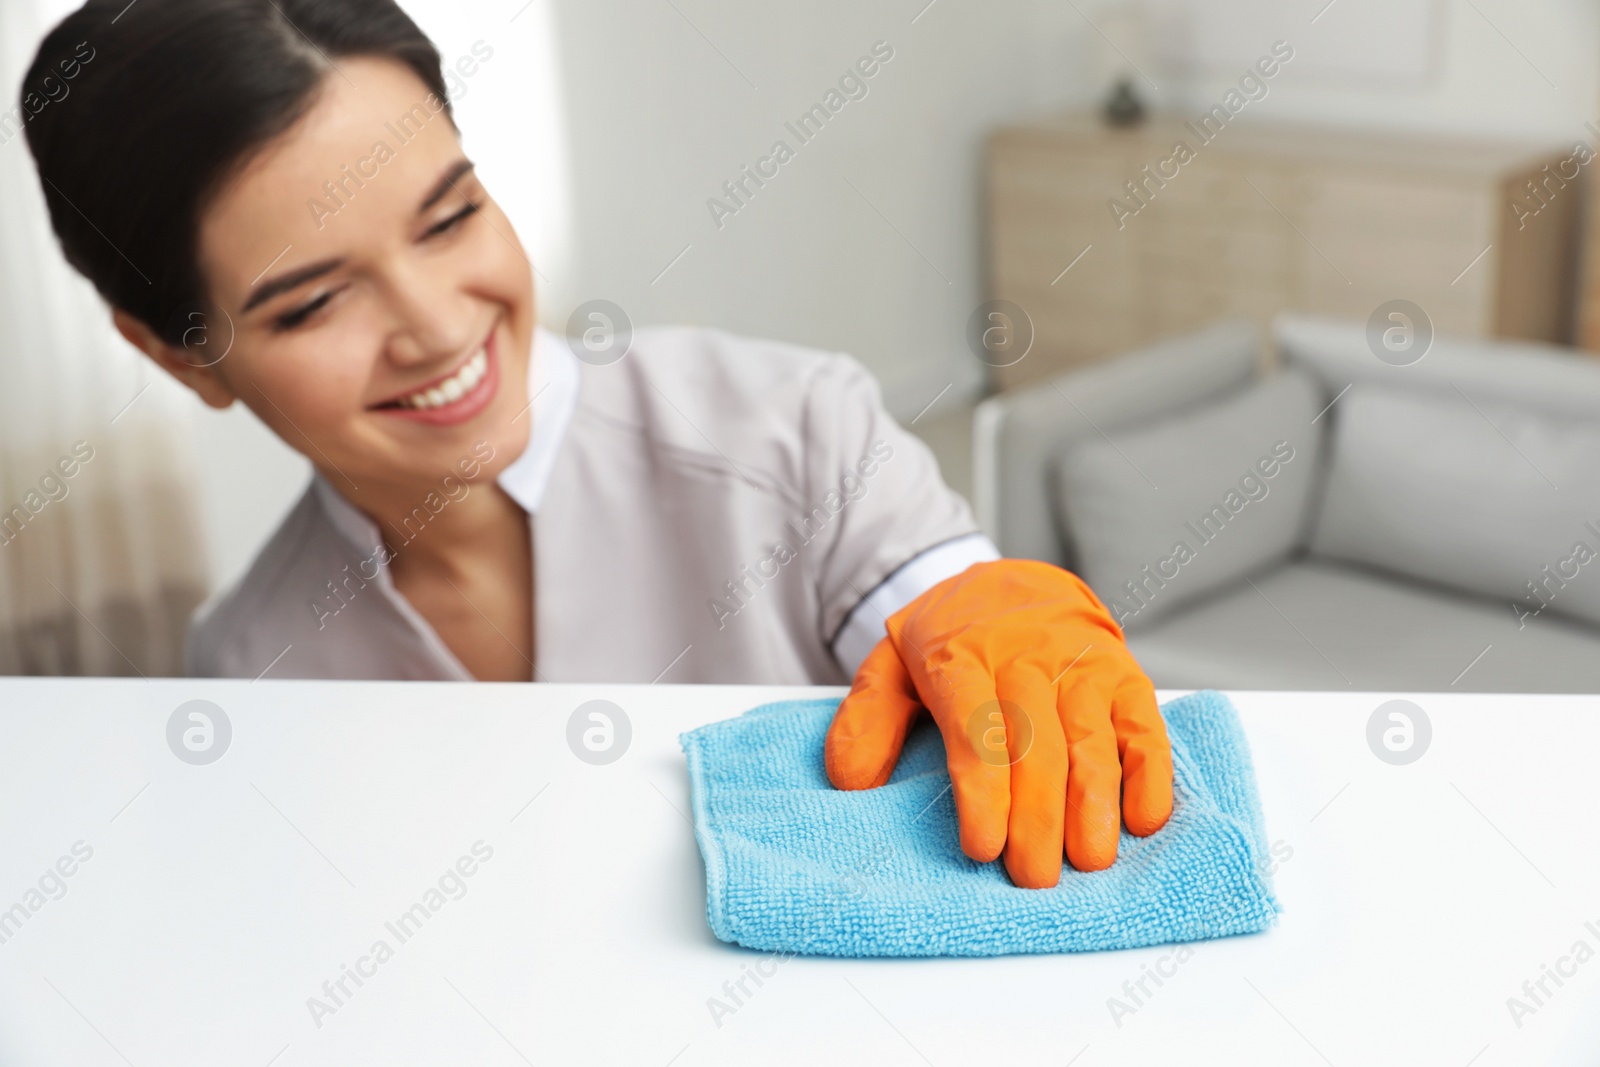 Photo of Young maid dusting furniture with rag in hotel room